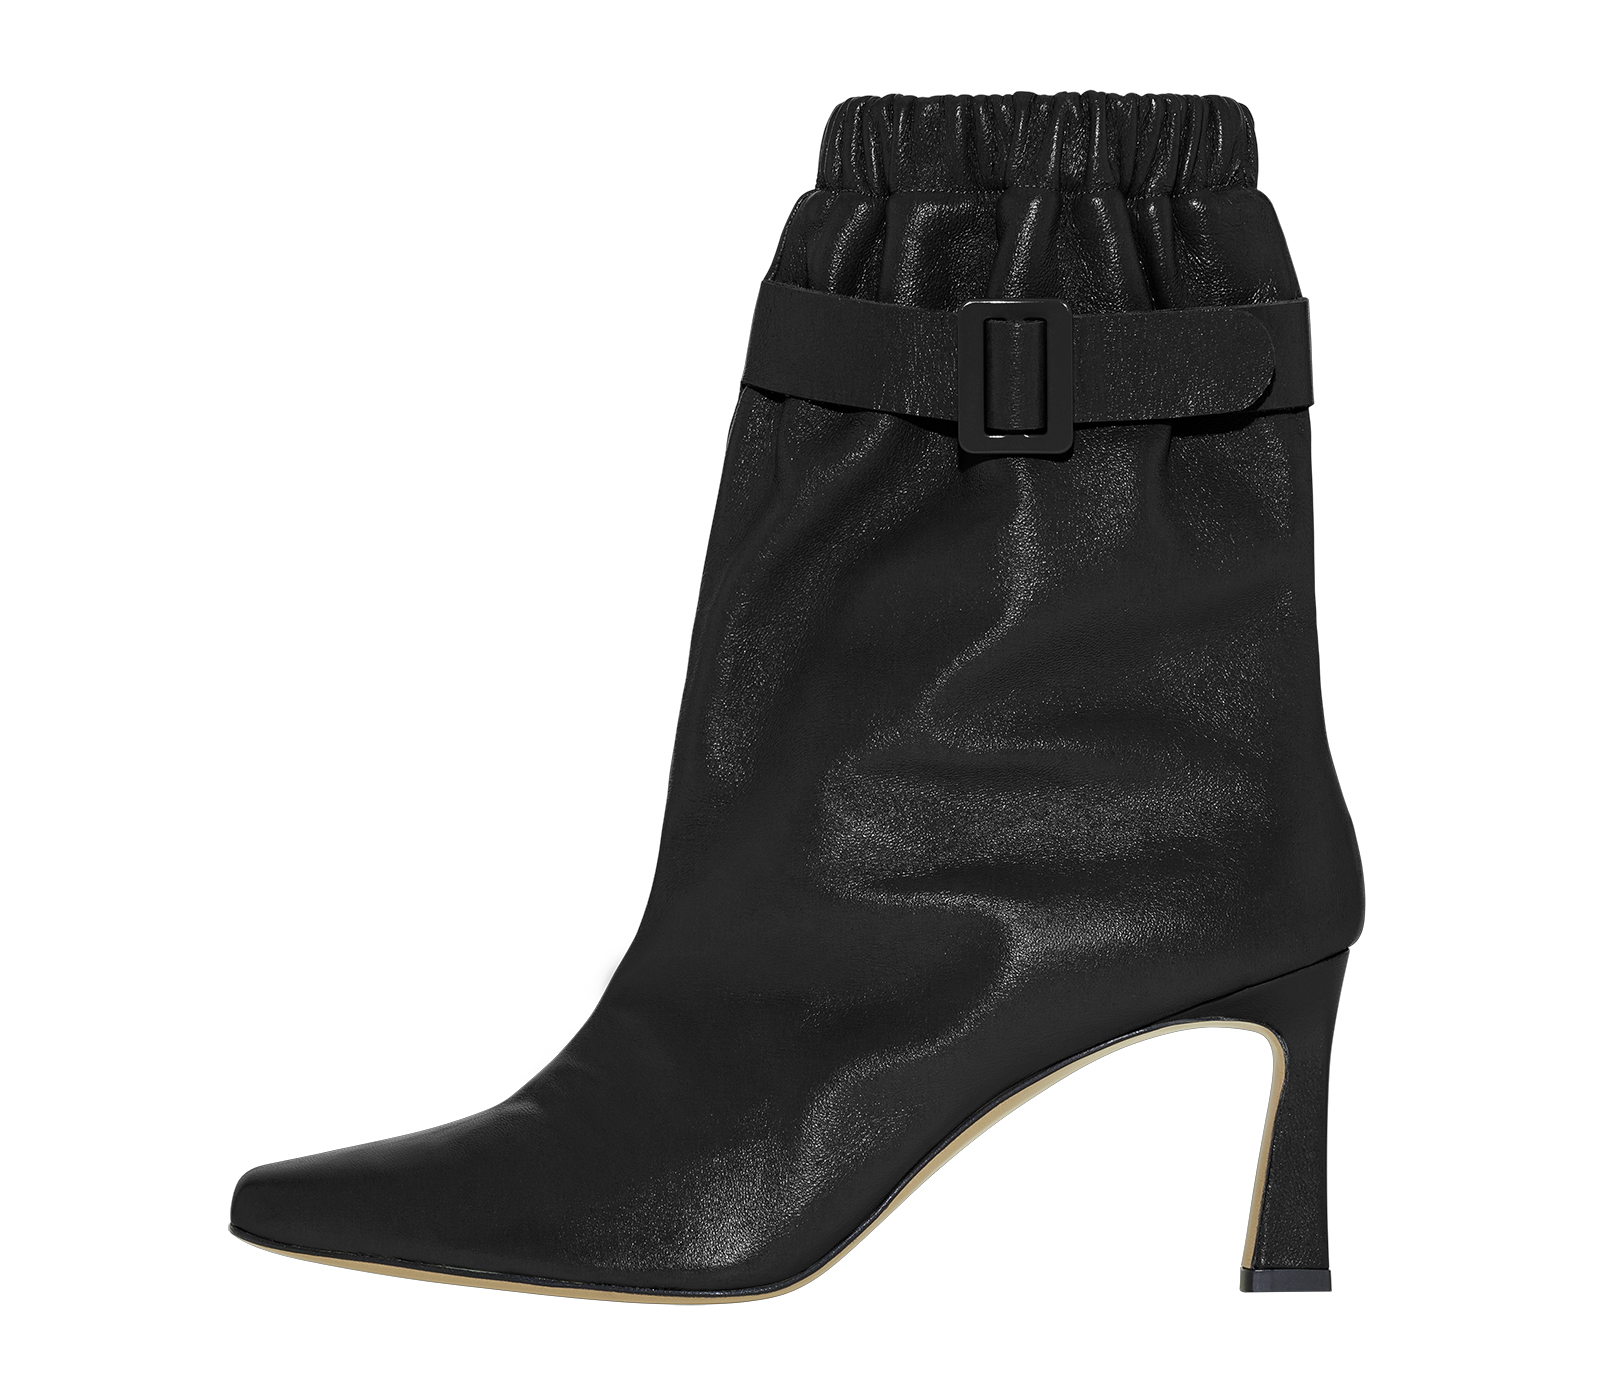 Slouchy Buckle Boot